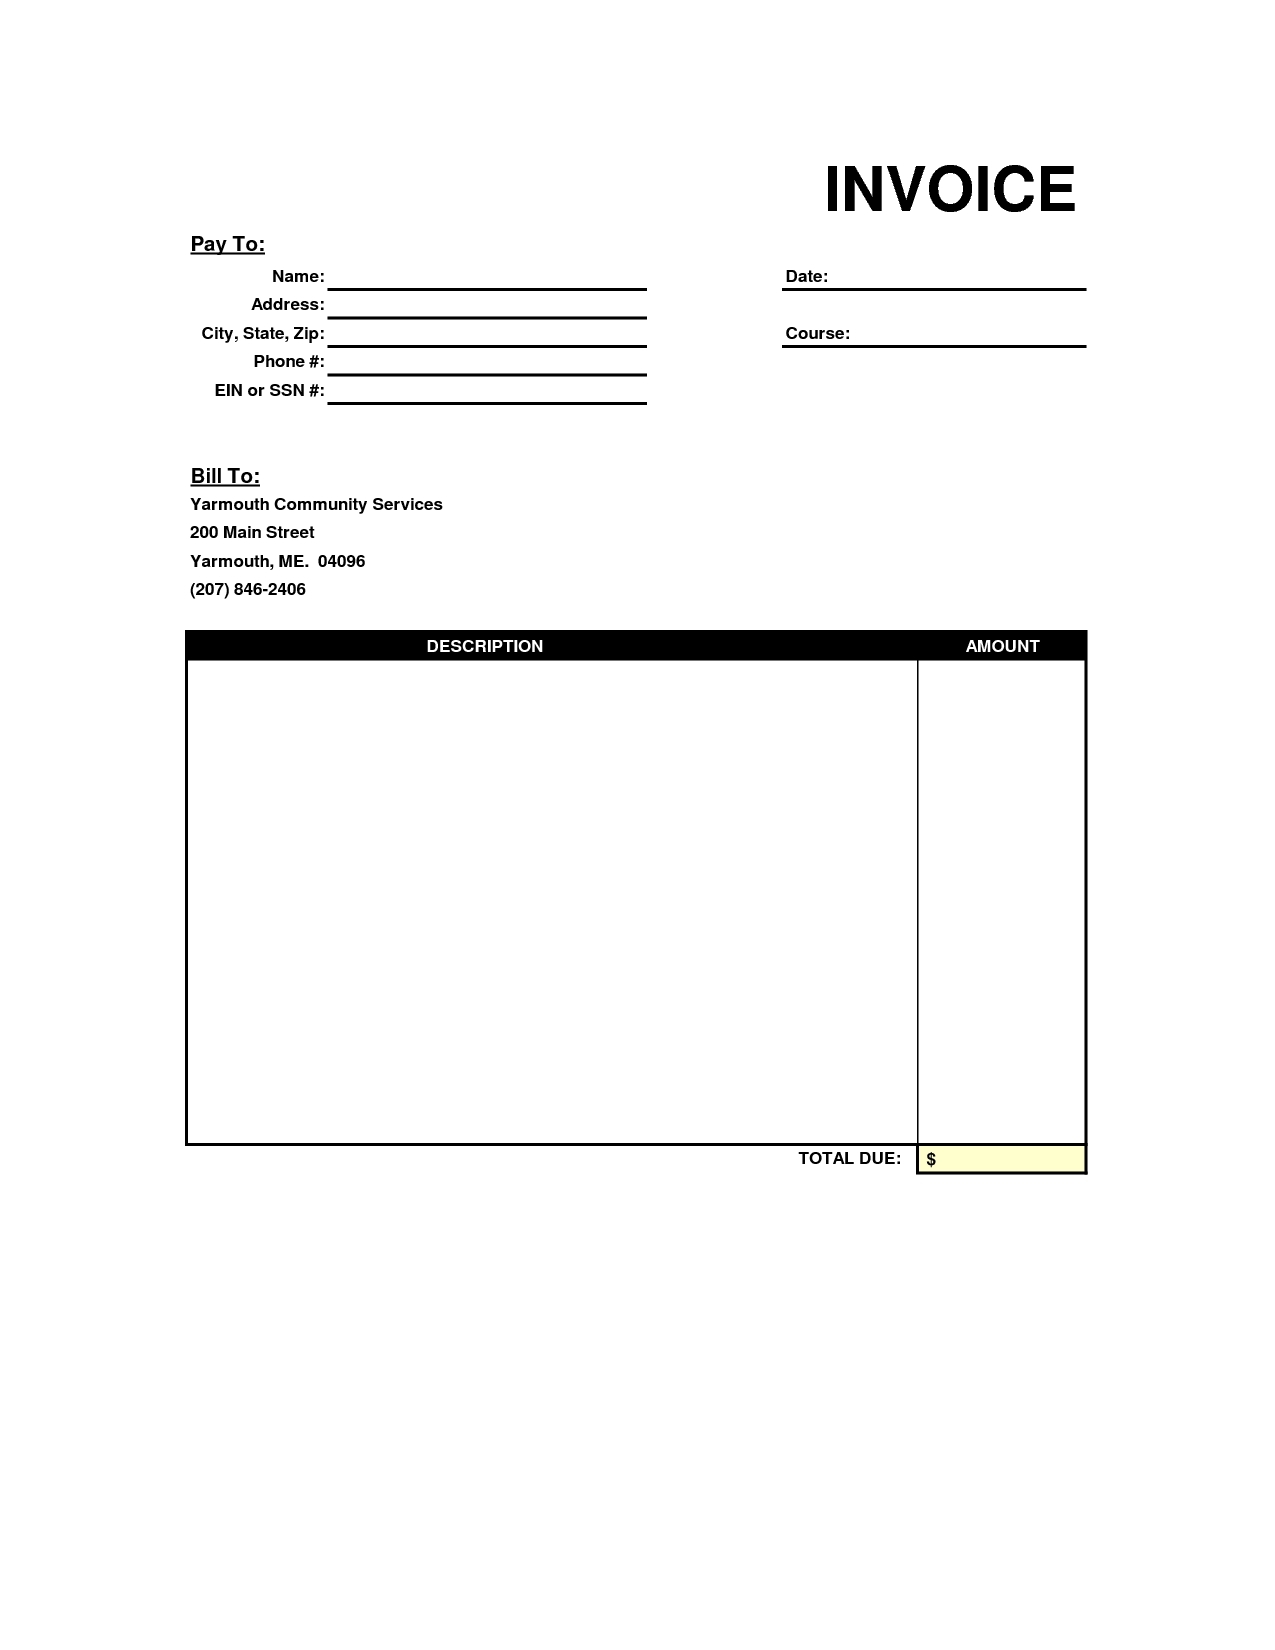 generic invoice template invoice template free 2016 generic invoices printable